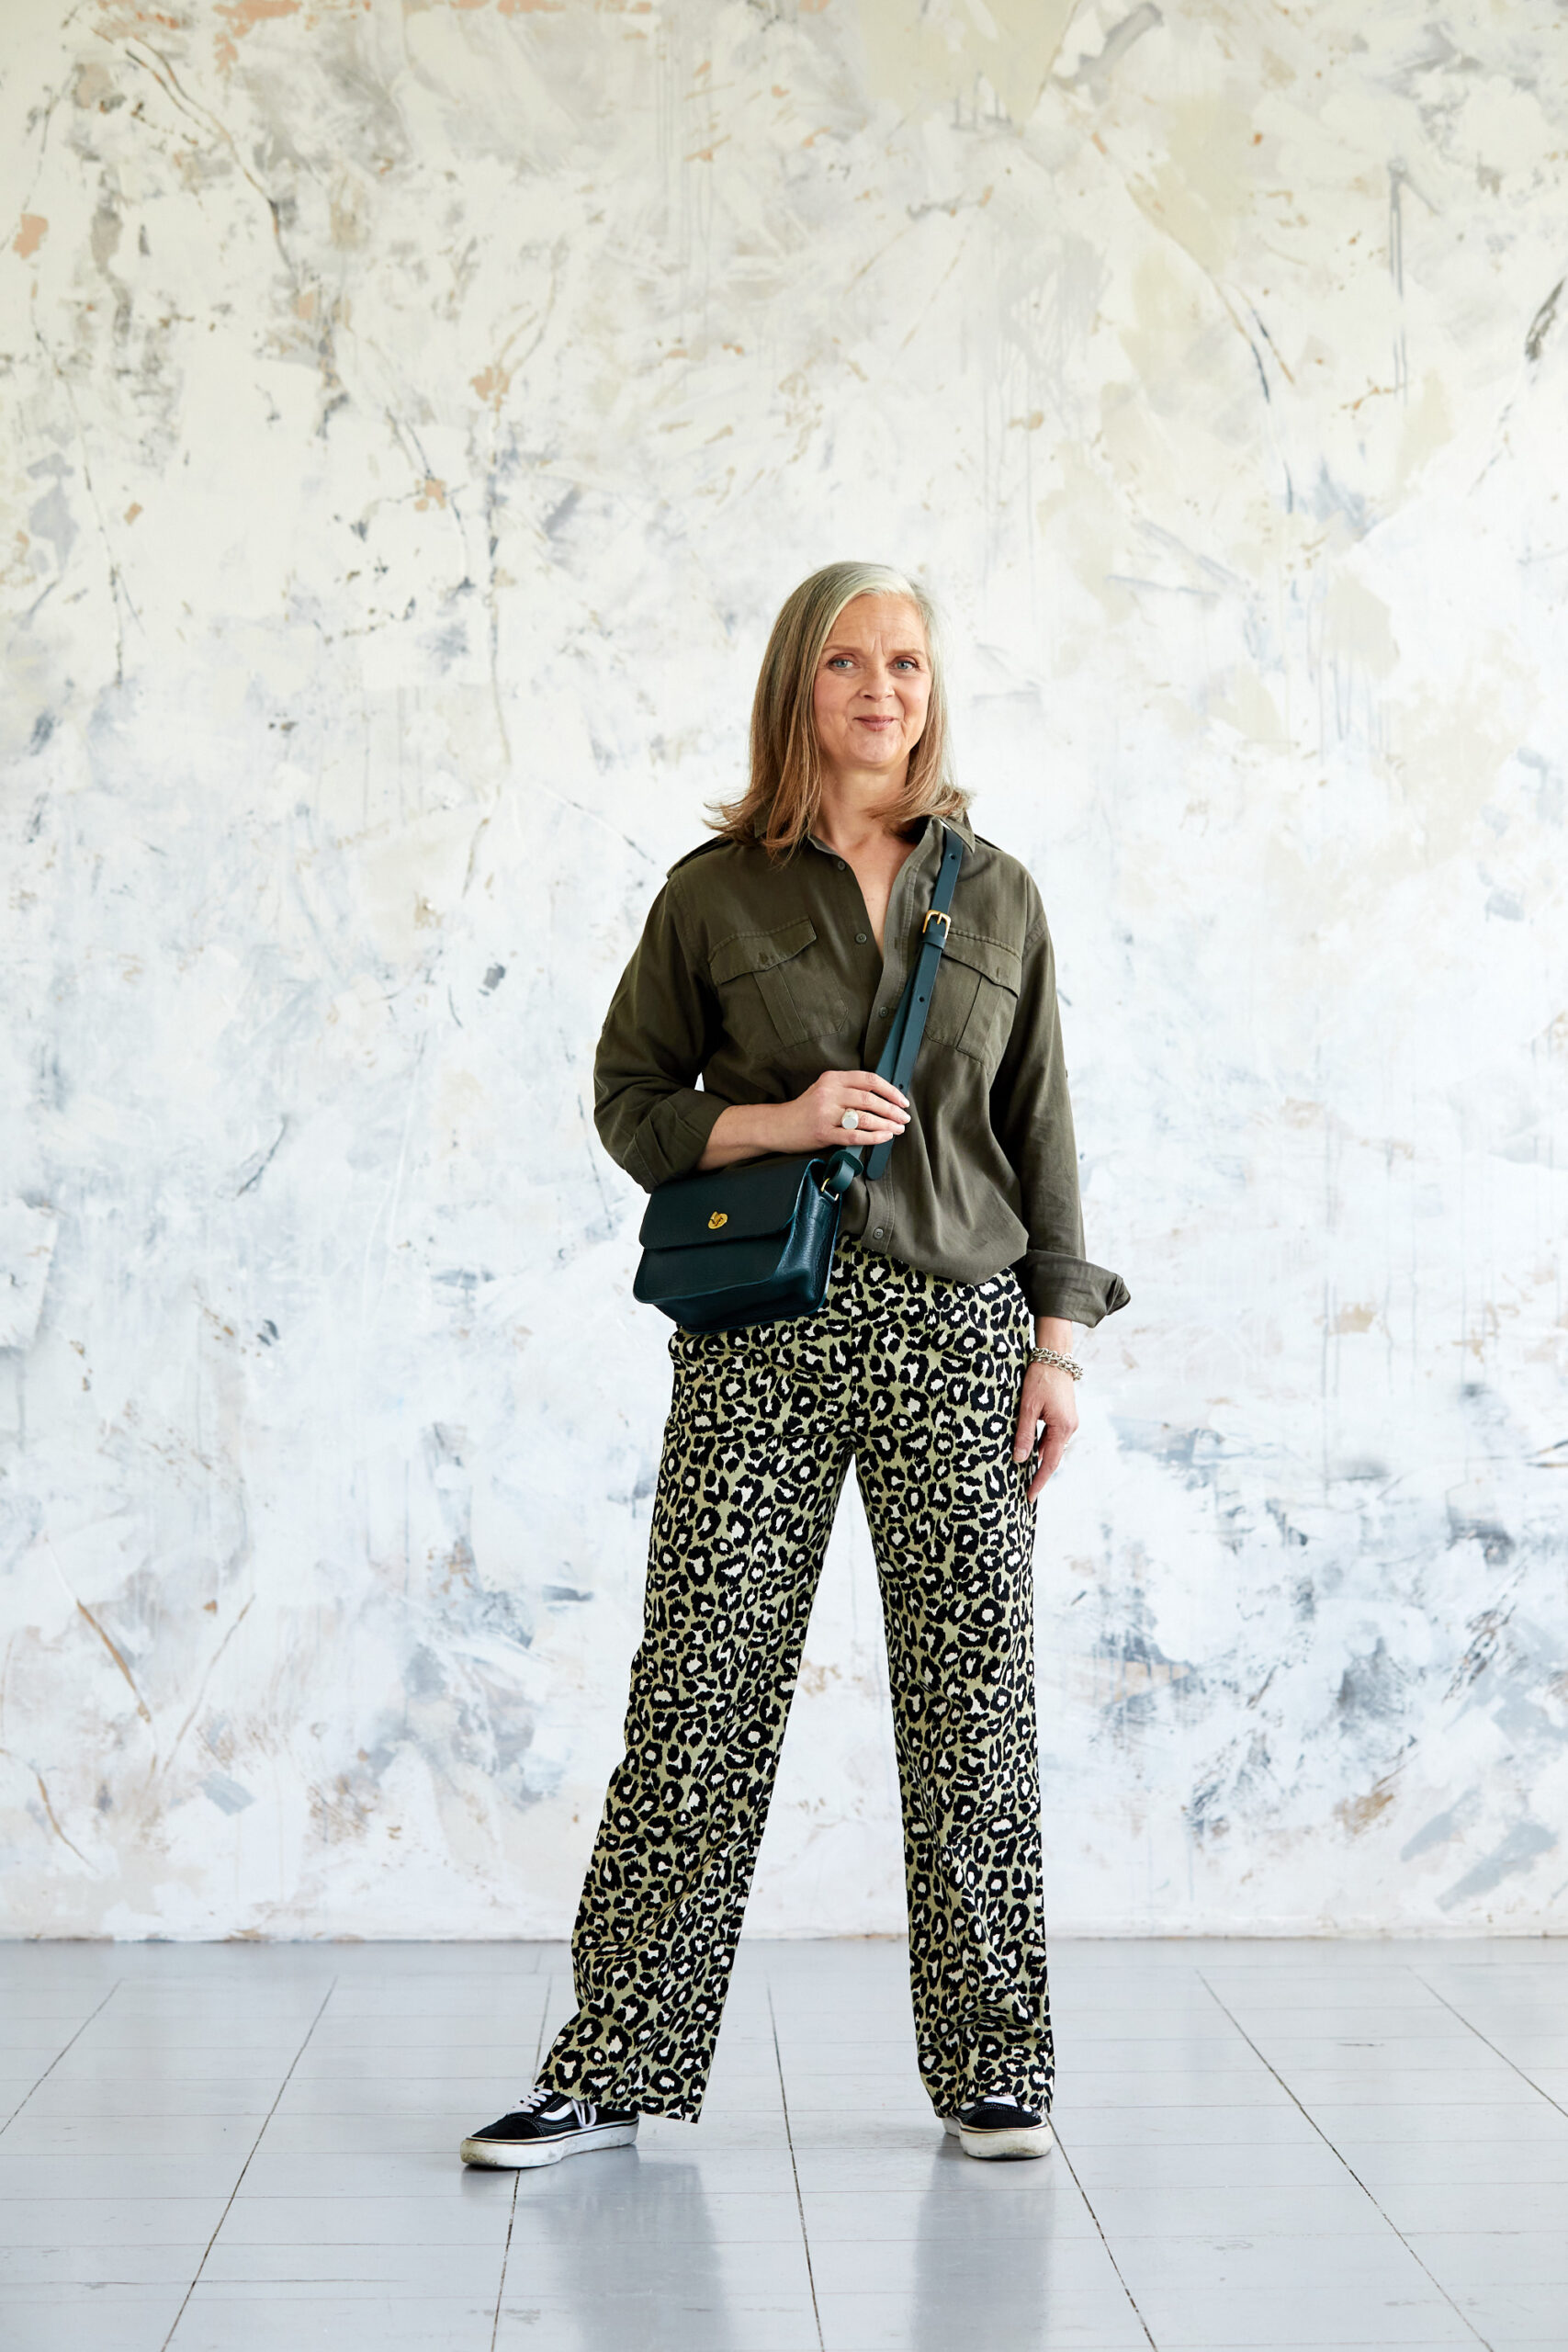 ANIMAL PRINT PANTS STYLED 8 DIFFERENT WAYS - The Nomis Niche